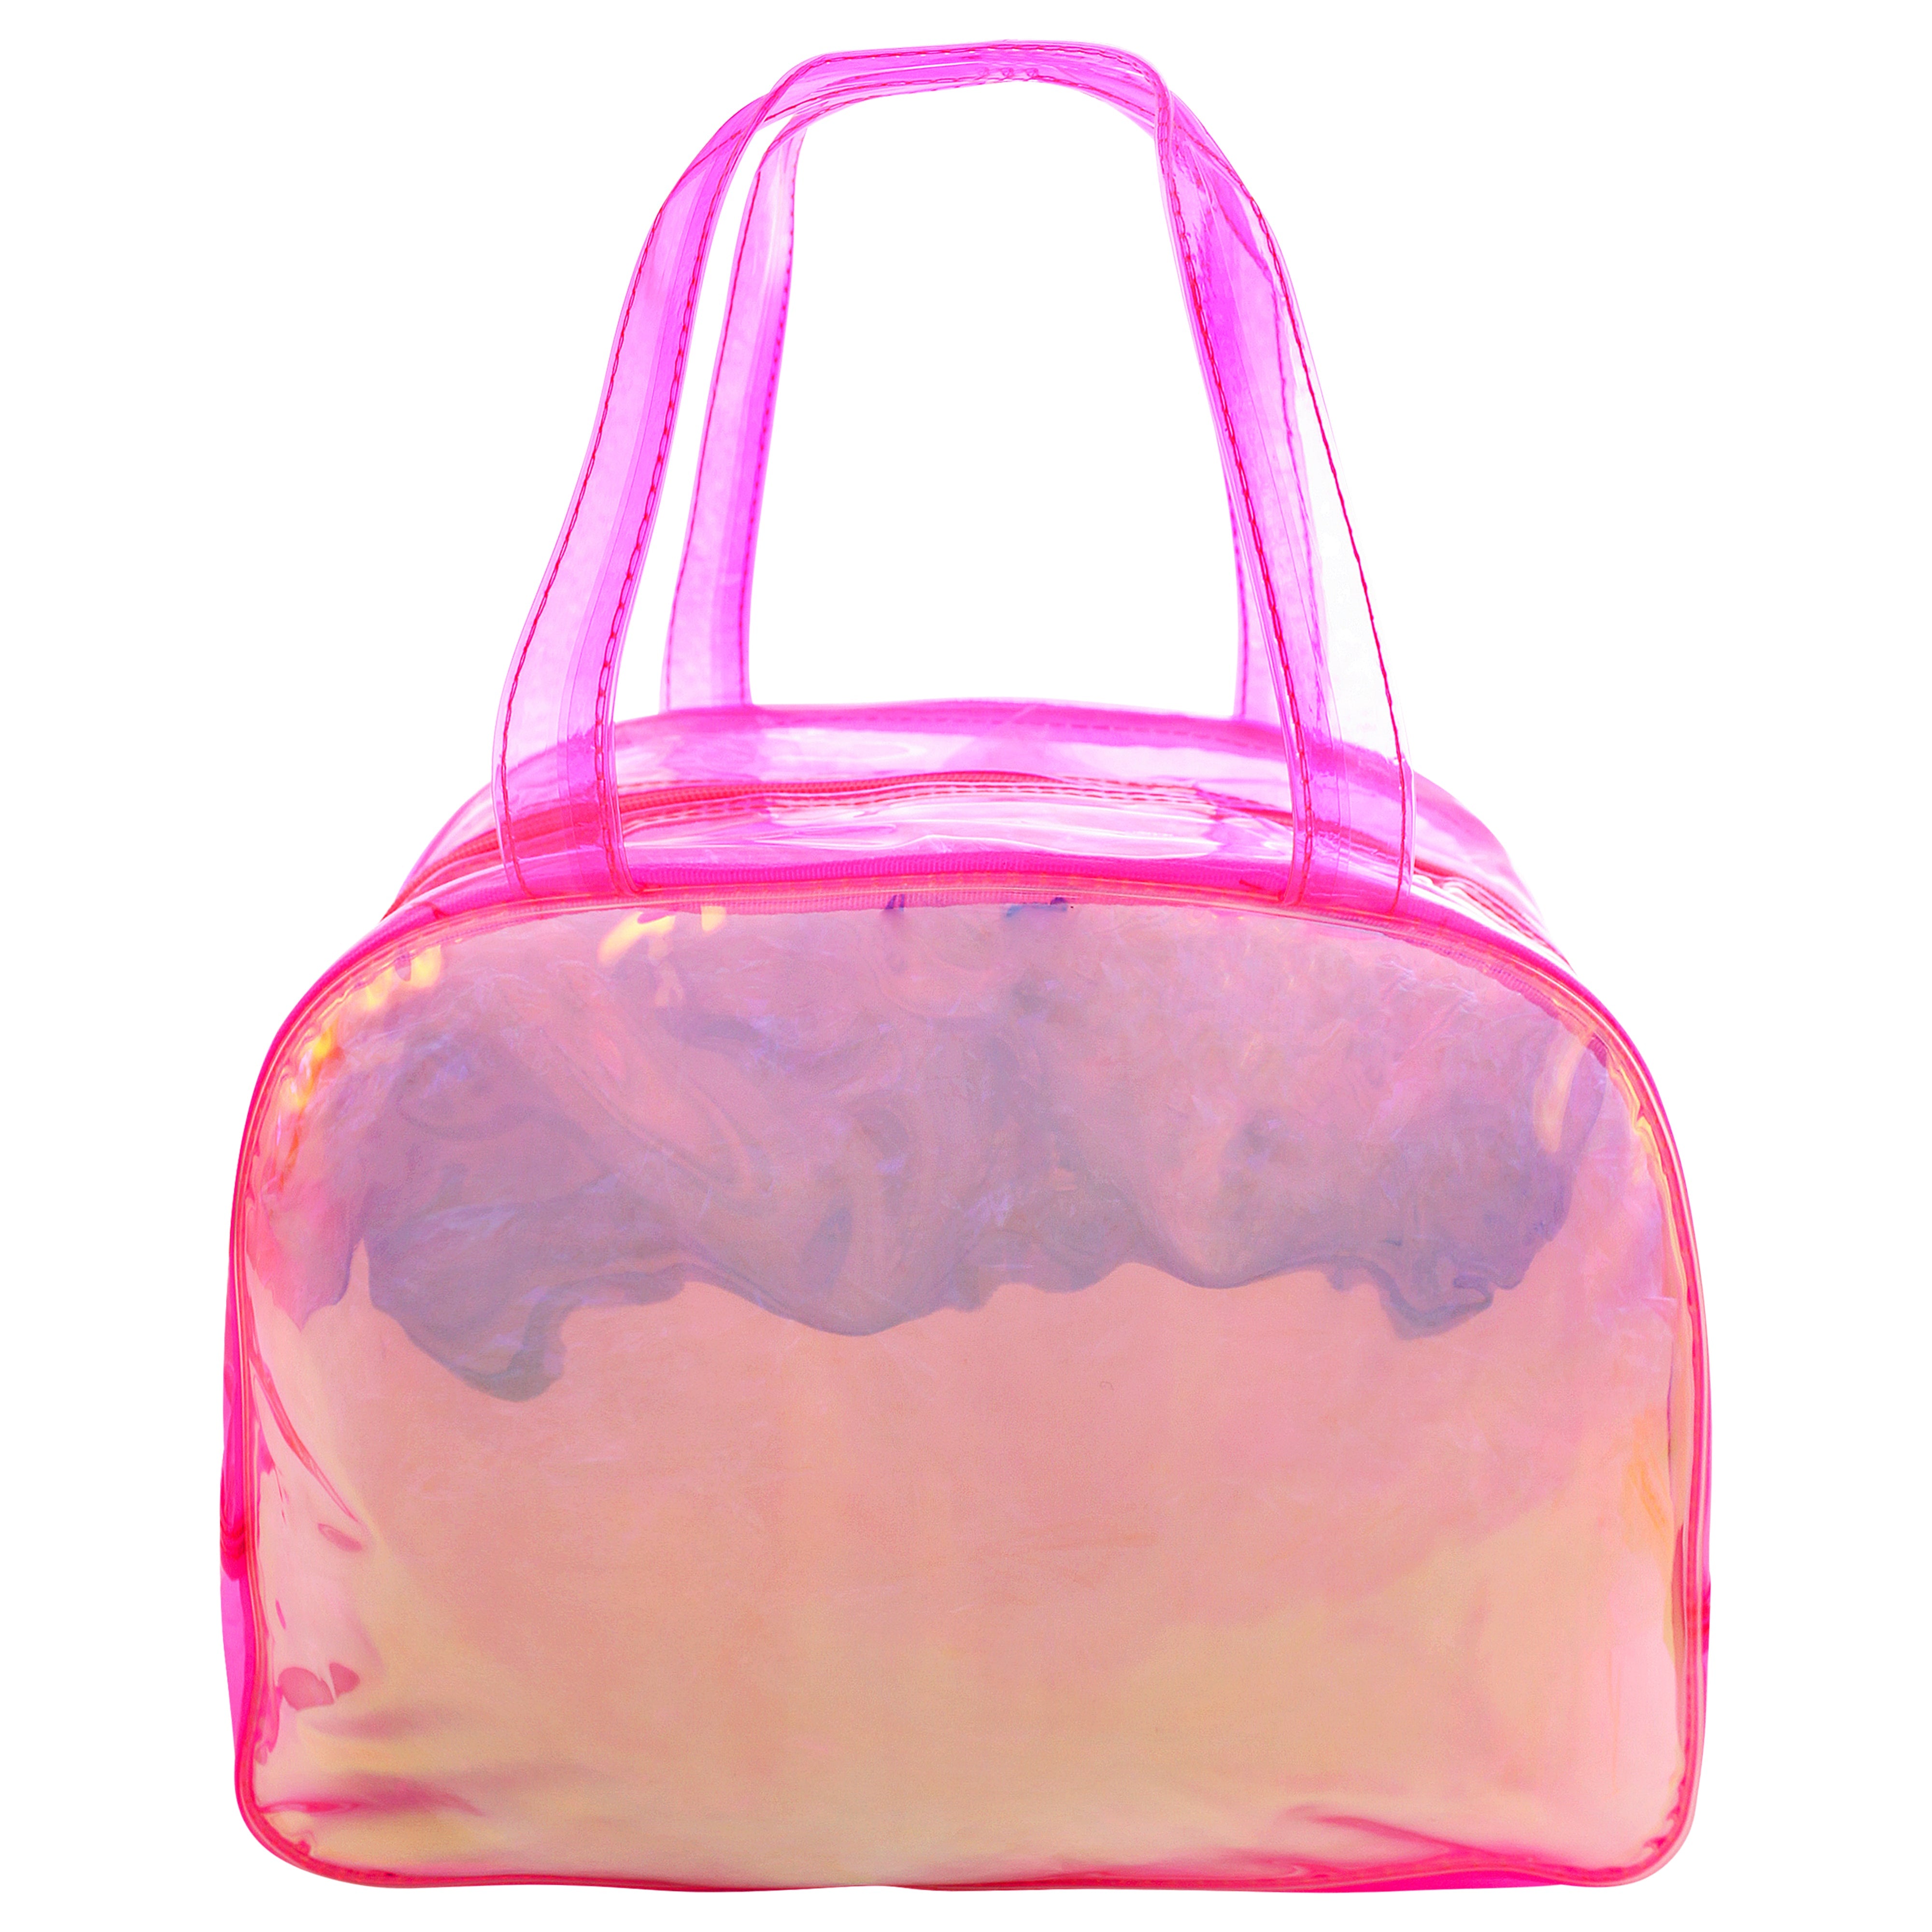 HL Shiny Boston Bag Pink With Busy Pouch Pink